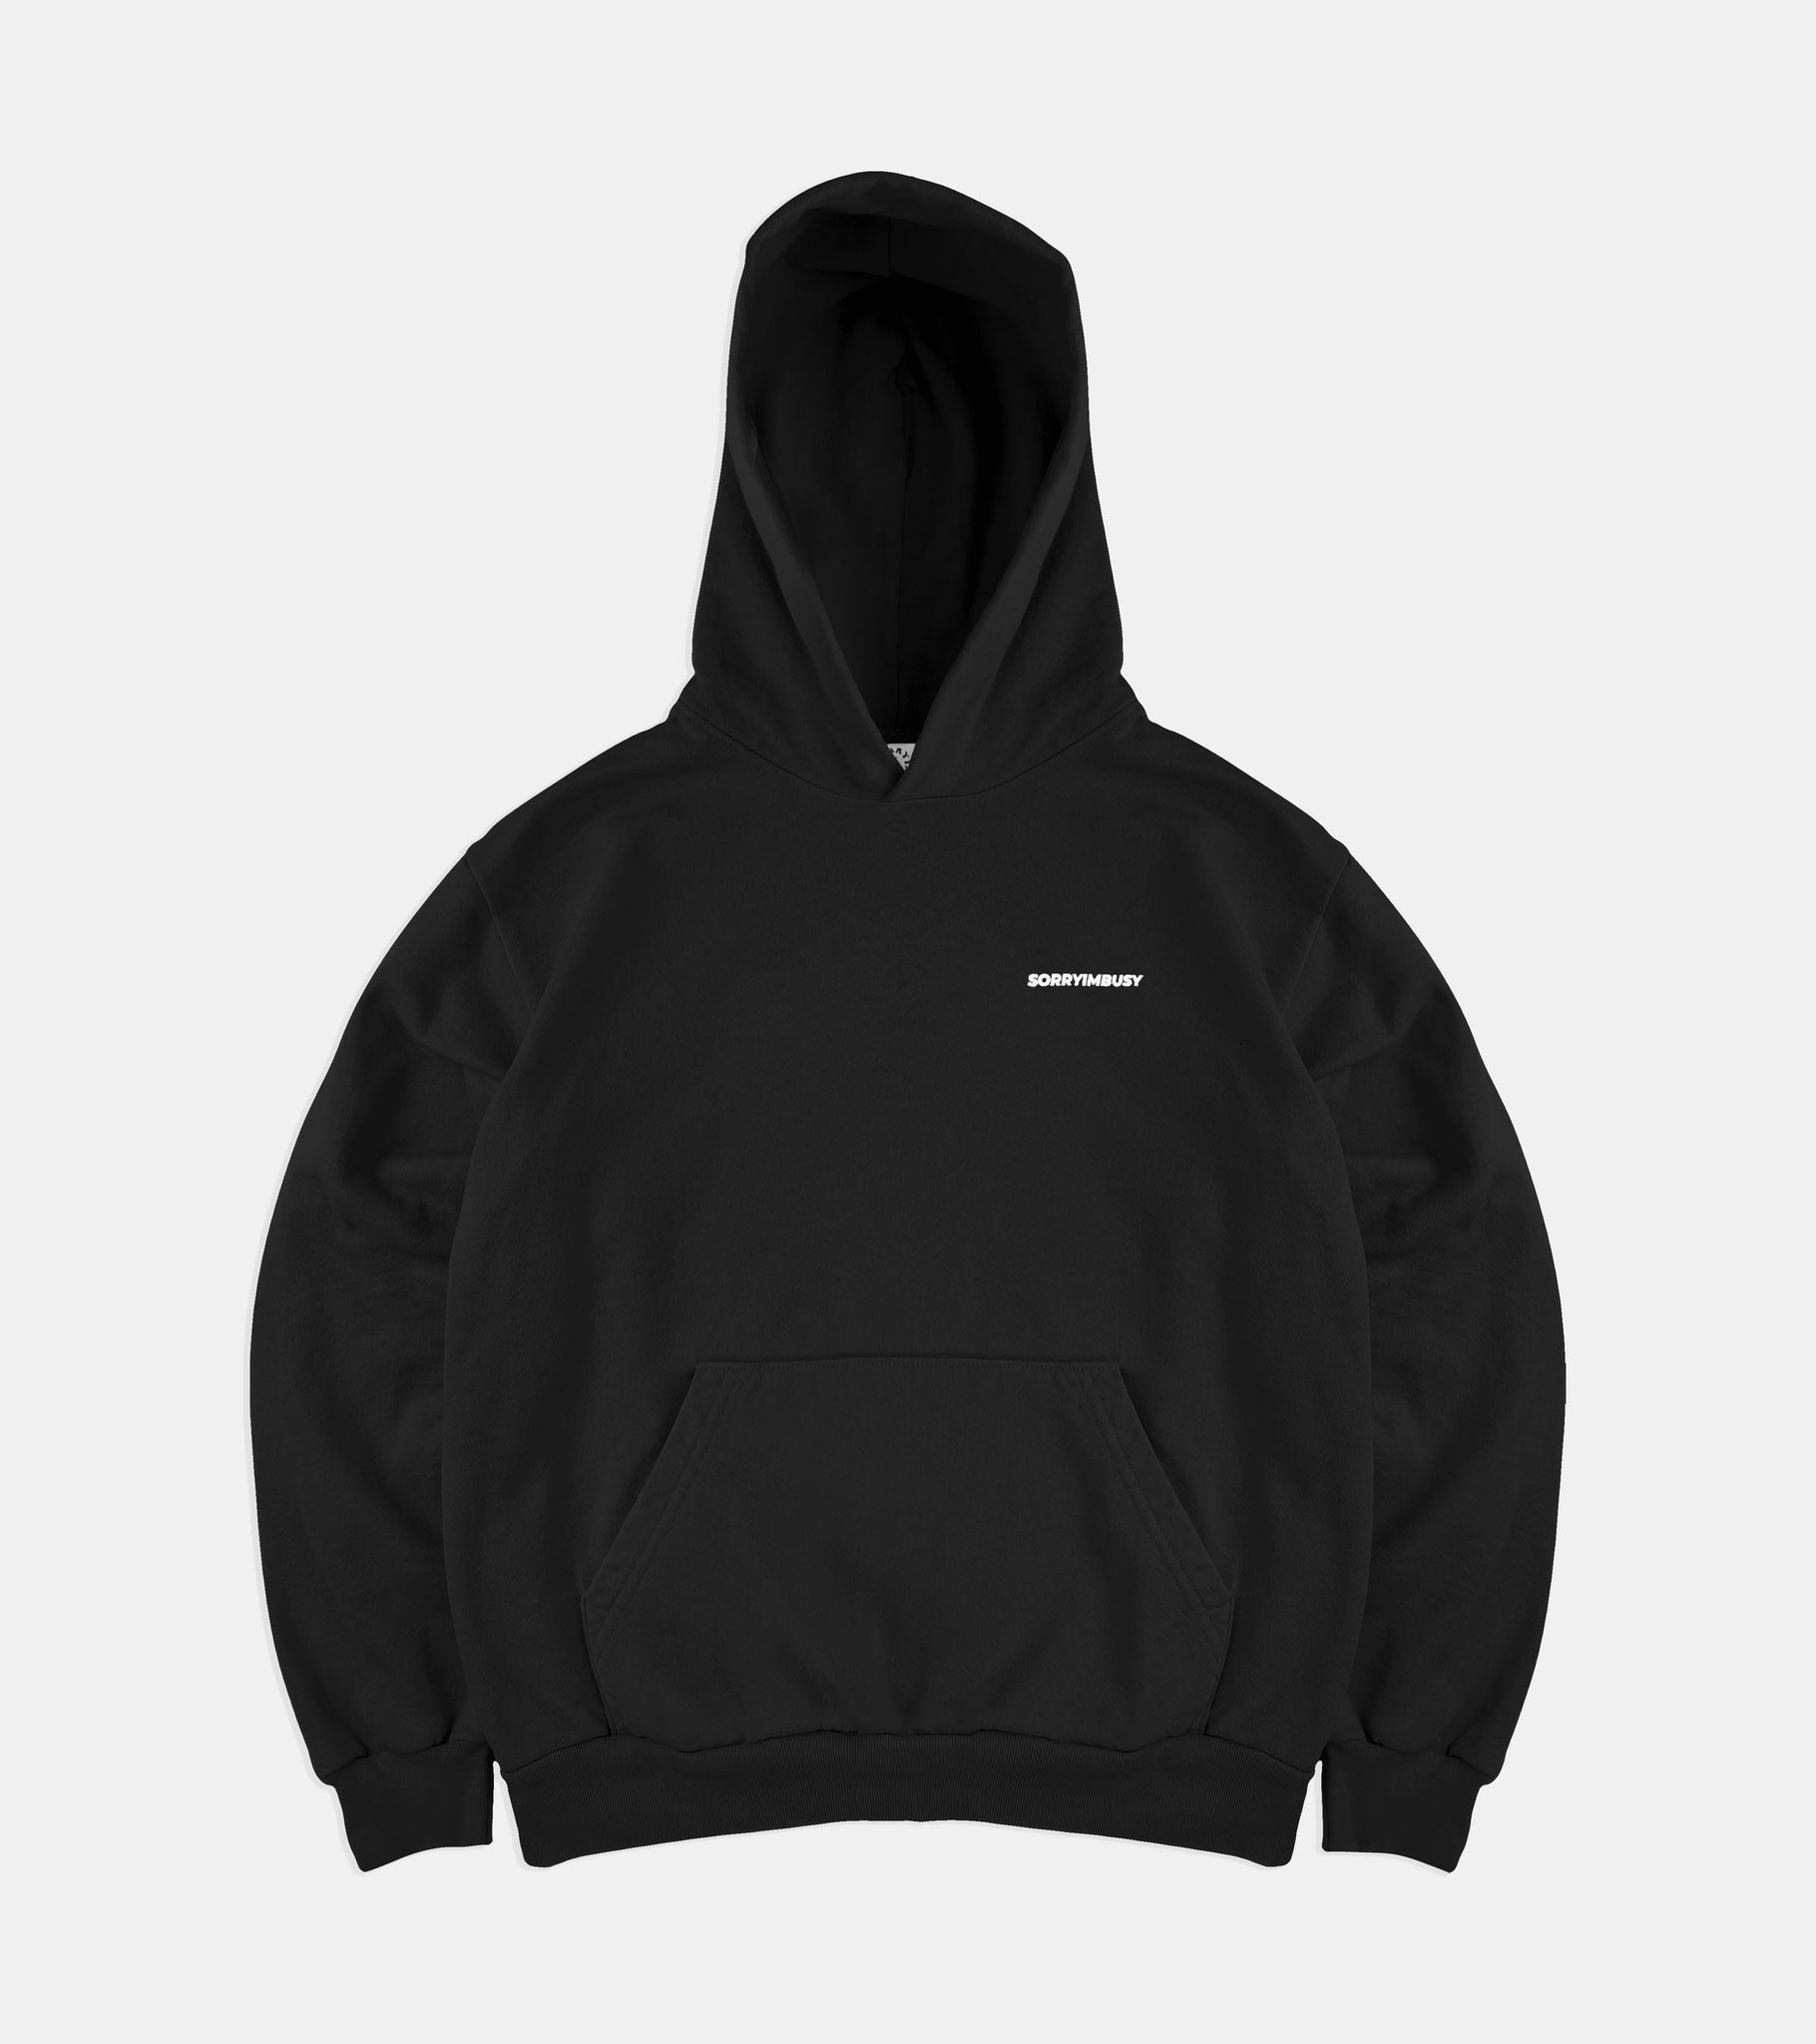 SORRYIMBUSY - BLACK LOGOTYPE HOODIE - 14OZ HEAVYWEIGHT 100% COTTON - MADE IN USA